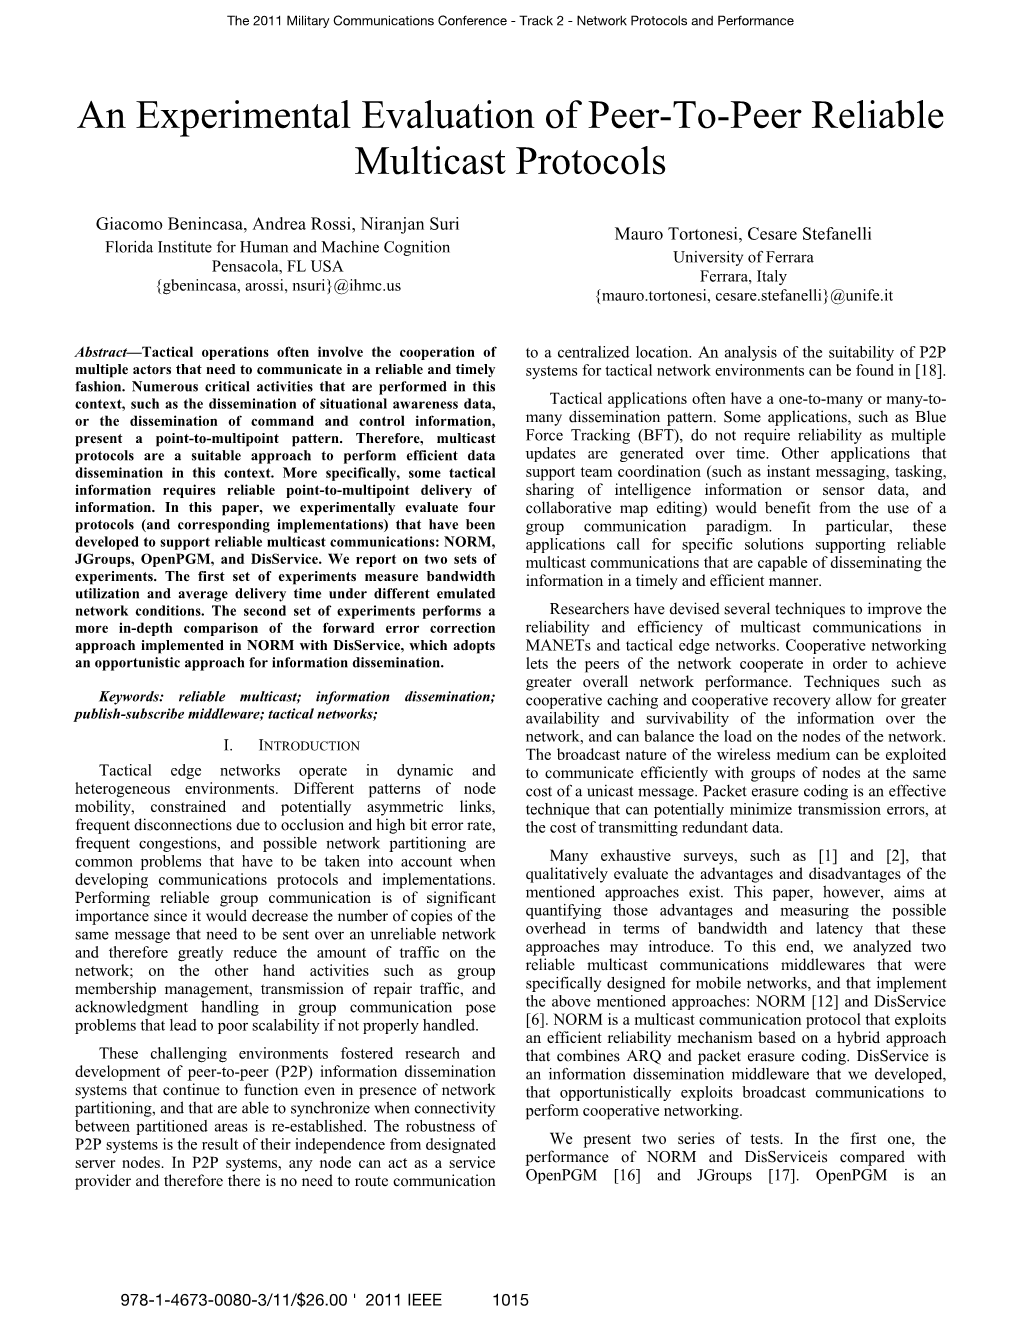 An Experimental Evaluation of Peer-To-Peer Reliable Multicast Protocols